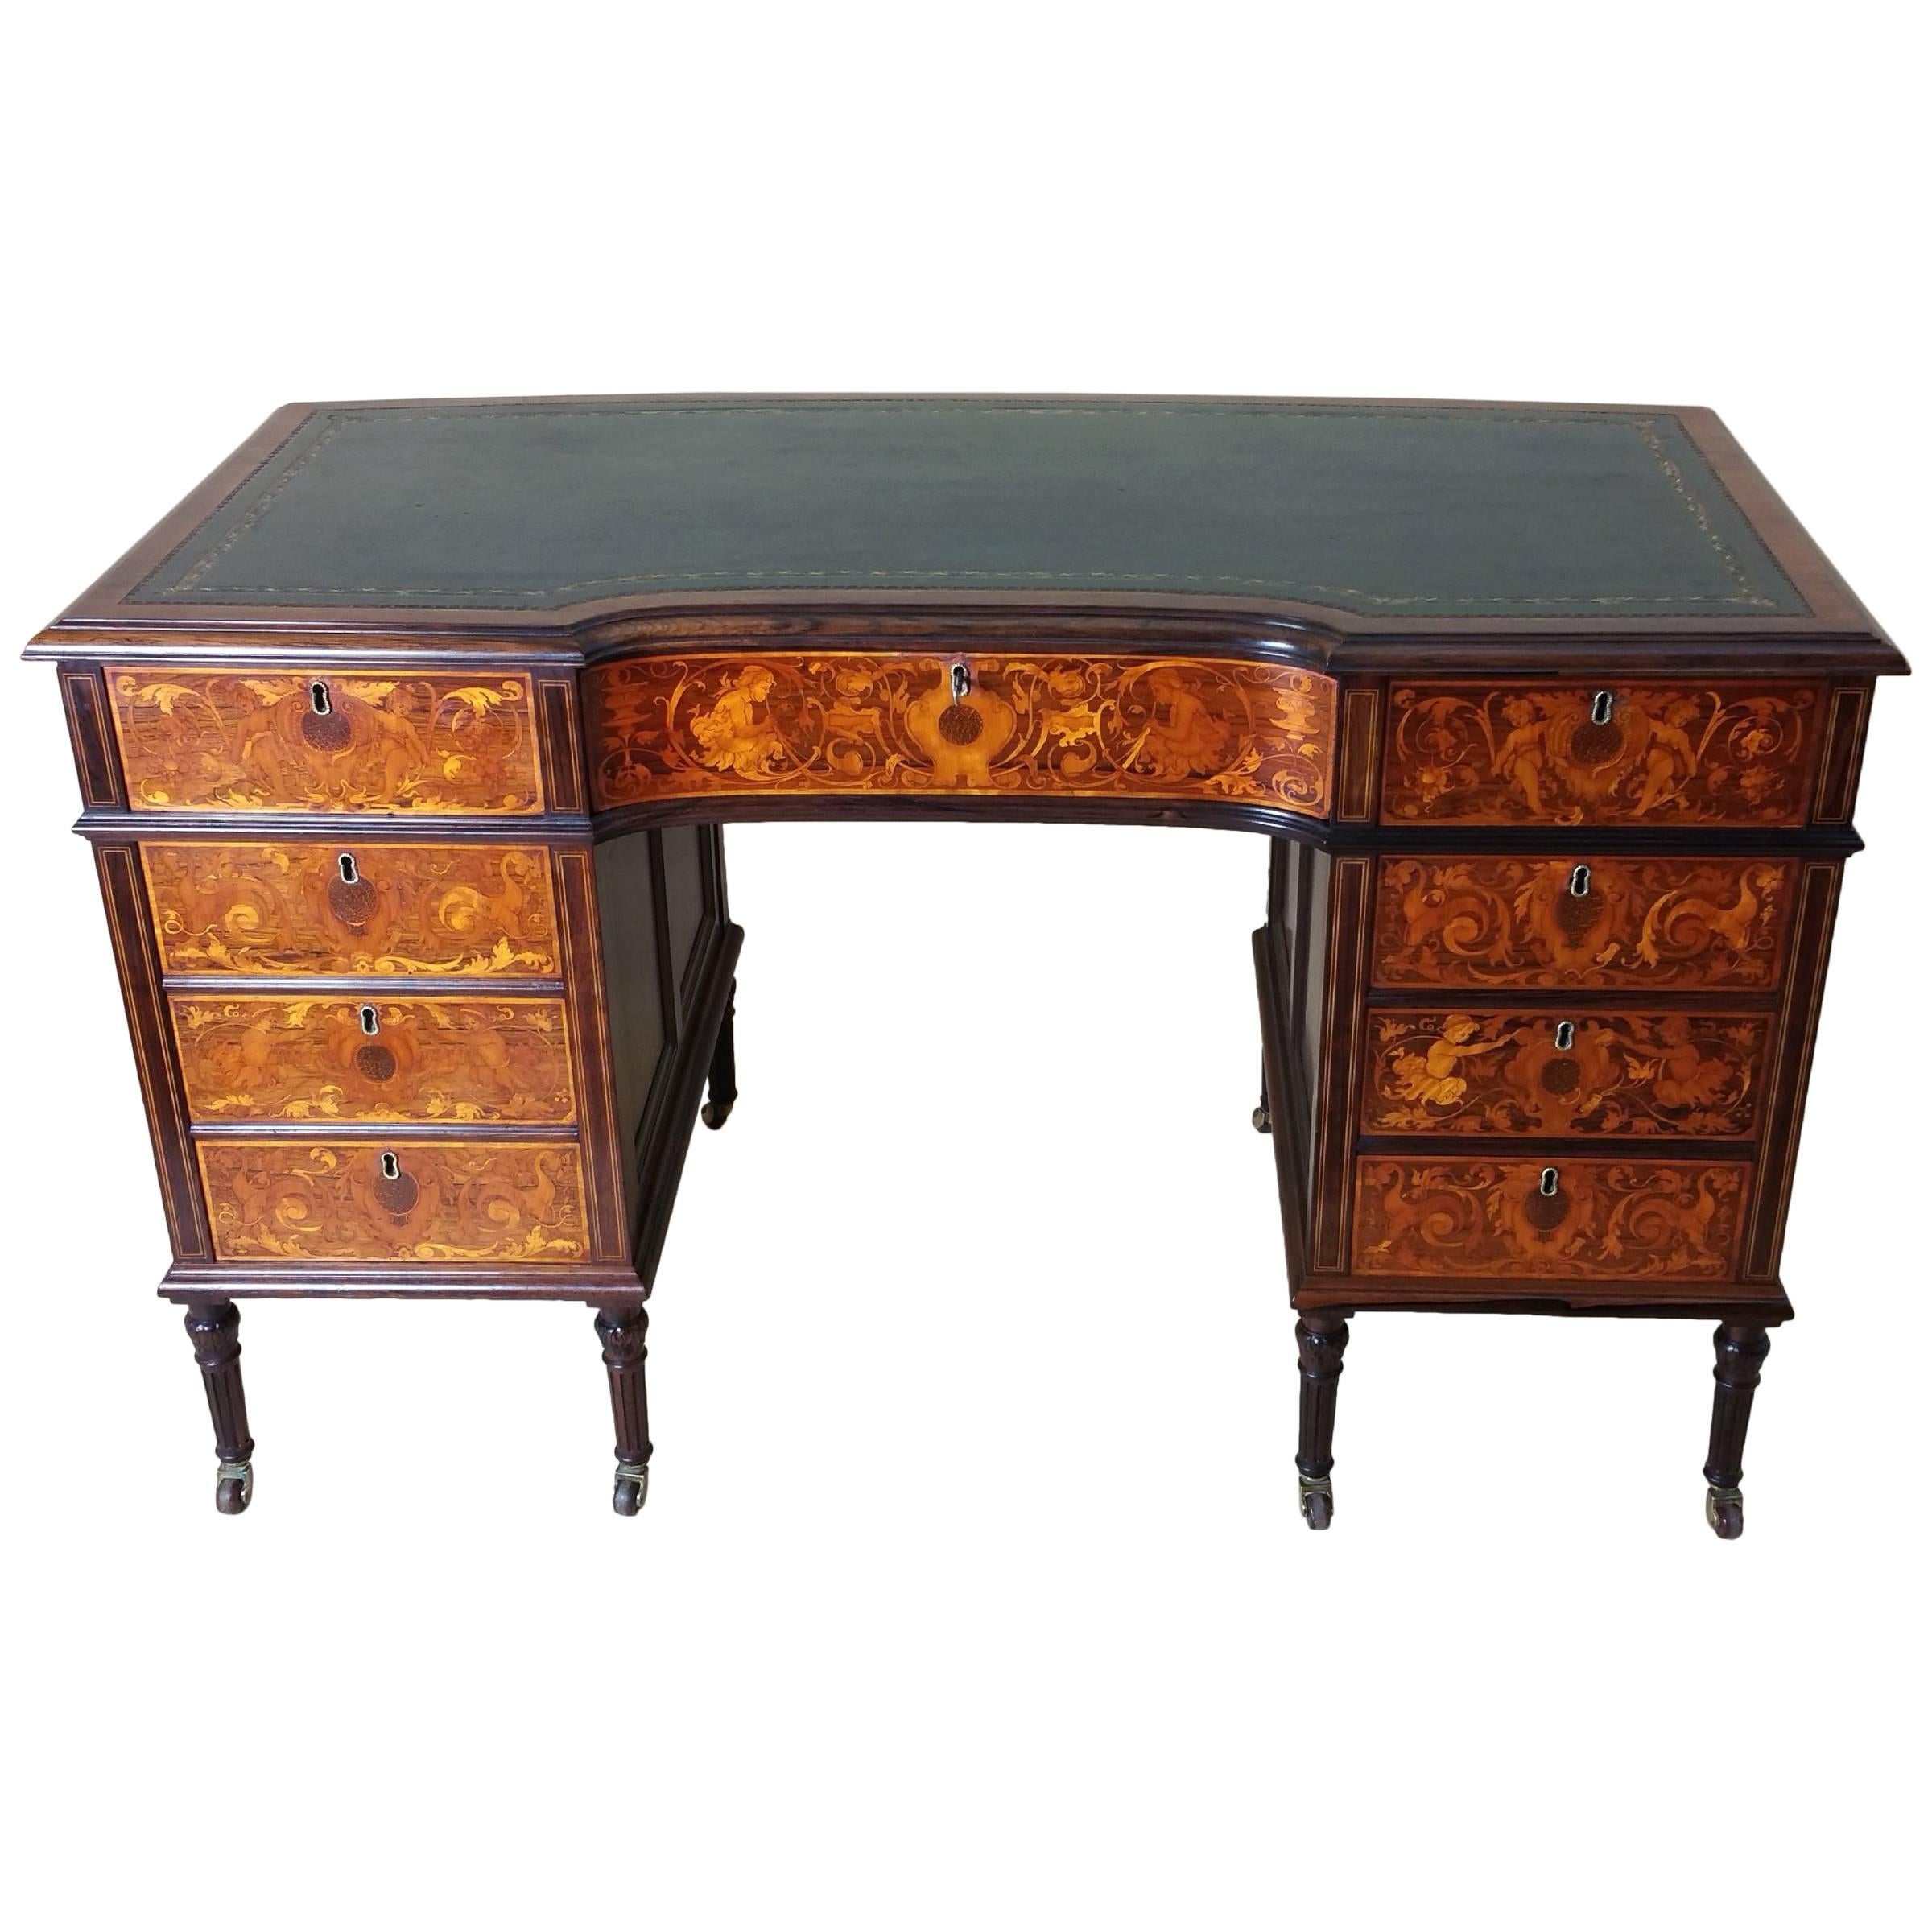 Victorian Marquetry Inlaid Rosewood Shaped Front Kneehole Desk